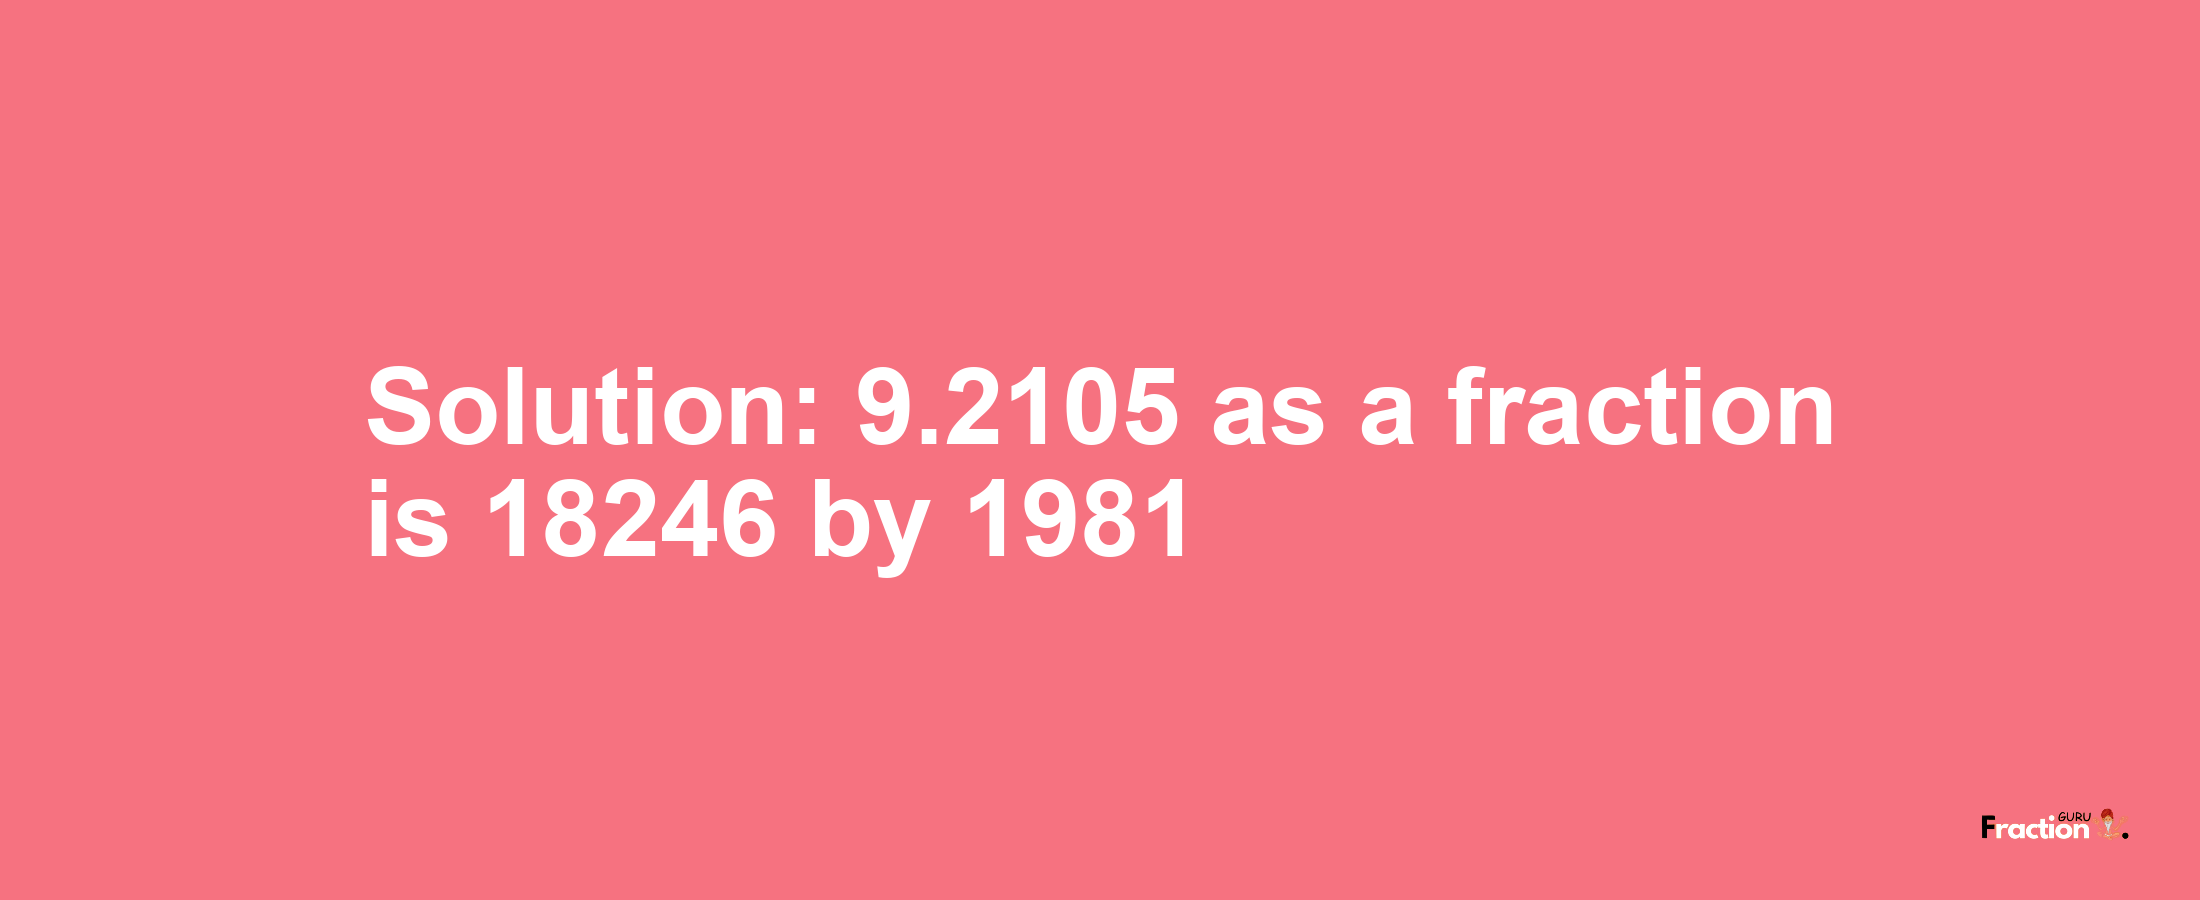 Solution:9.2105 as a fraction is 18246/1981